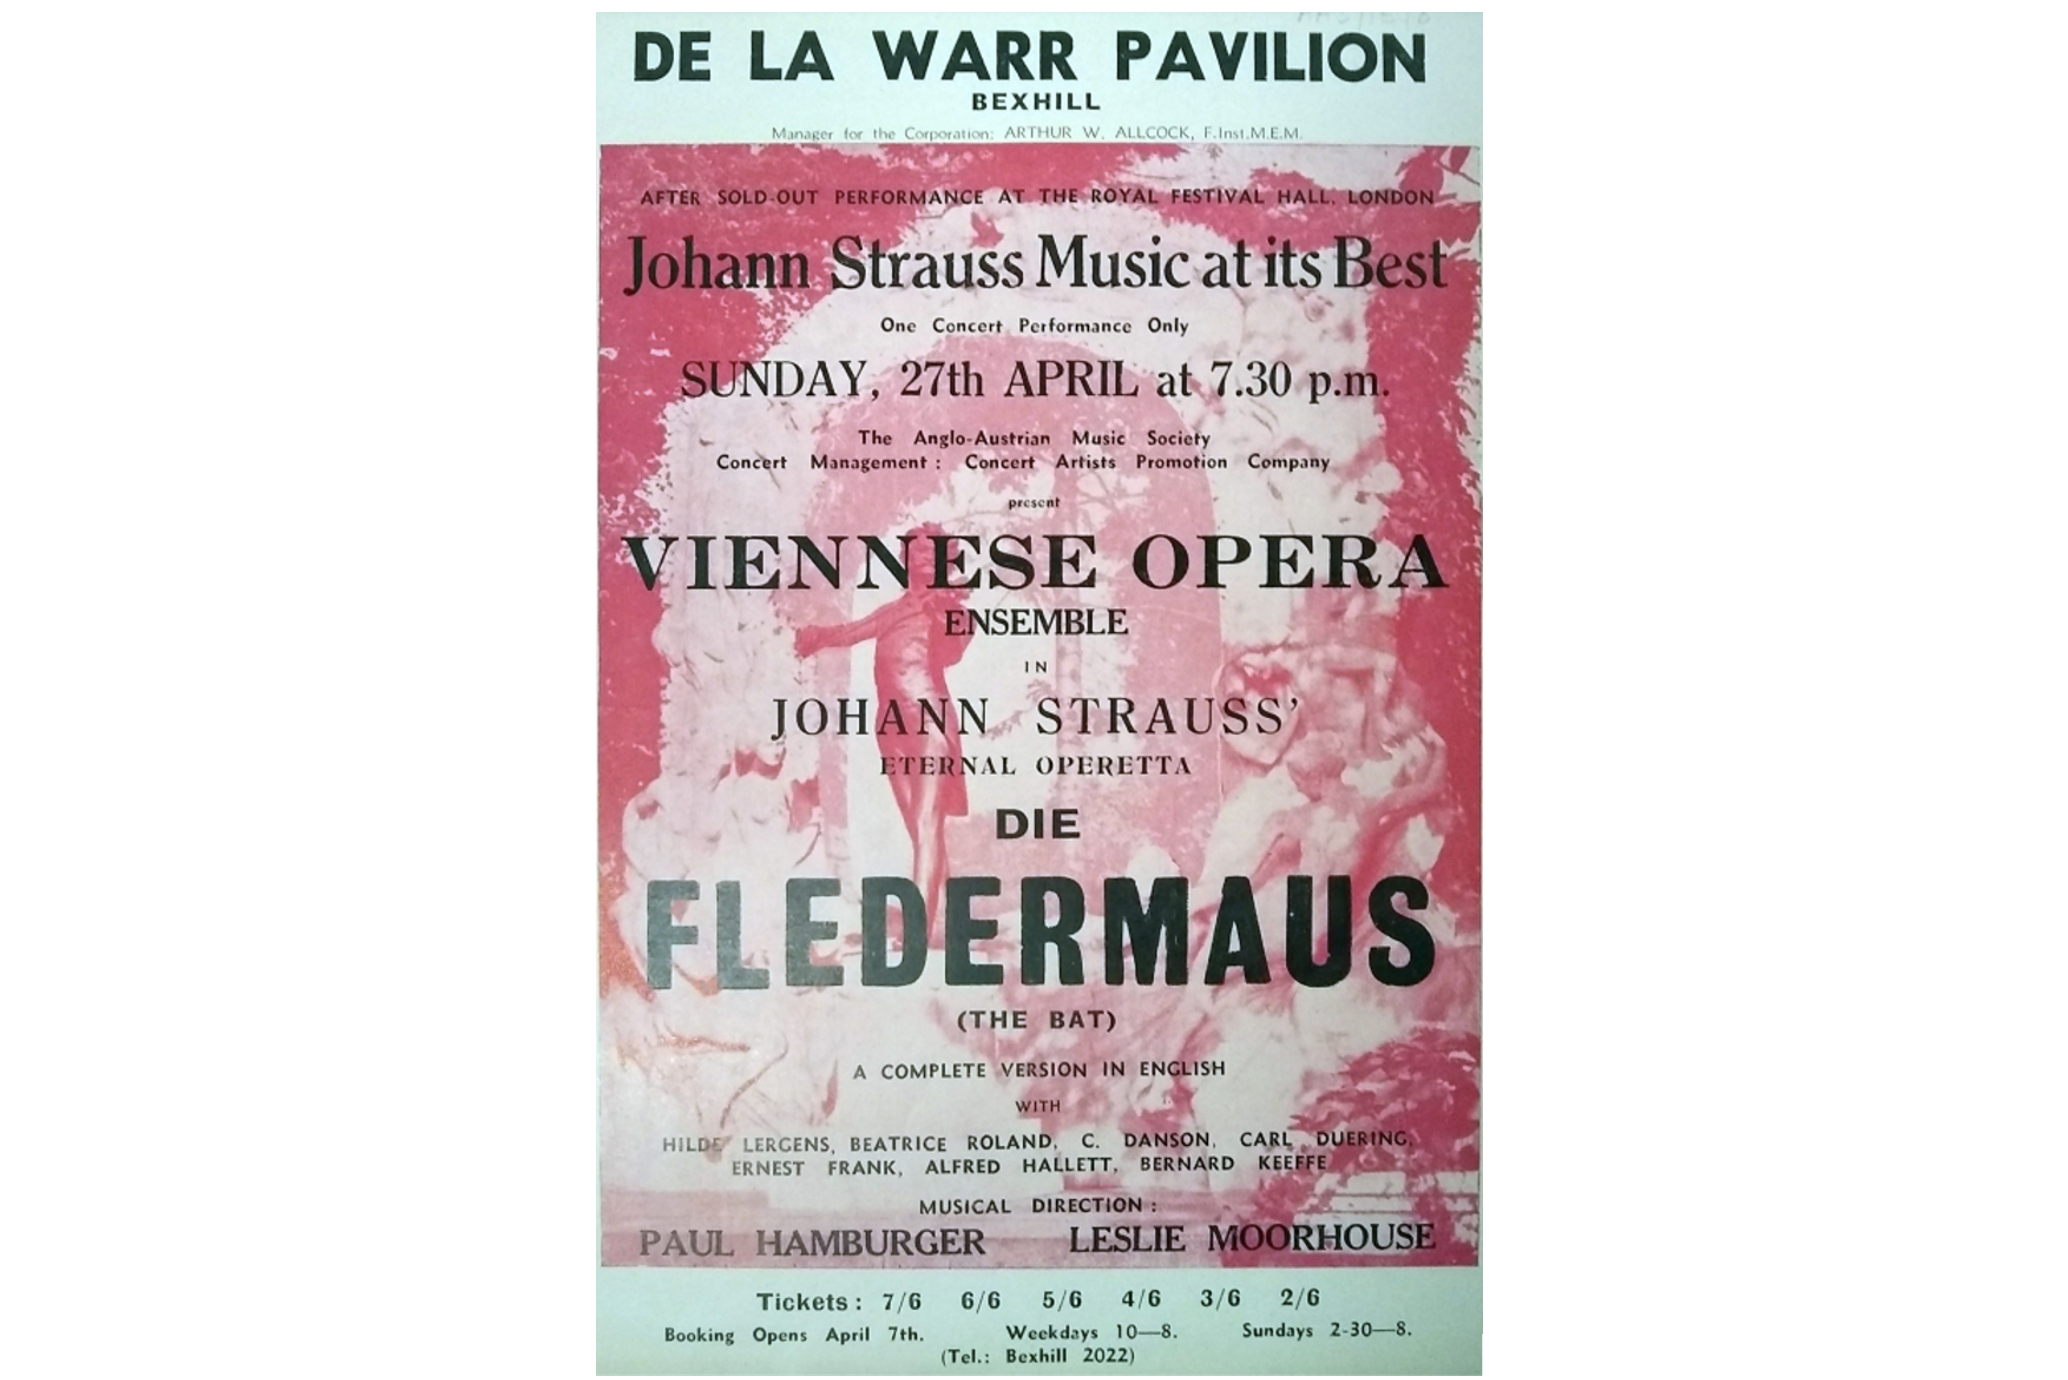 Poster announcing an English-language production of Die Fledermaus in Bexhill, part of a tour sponsored by the AAMS, 27 April 1952 